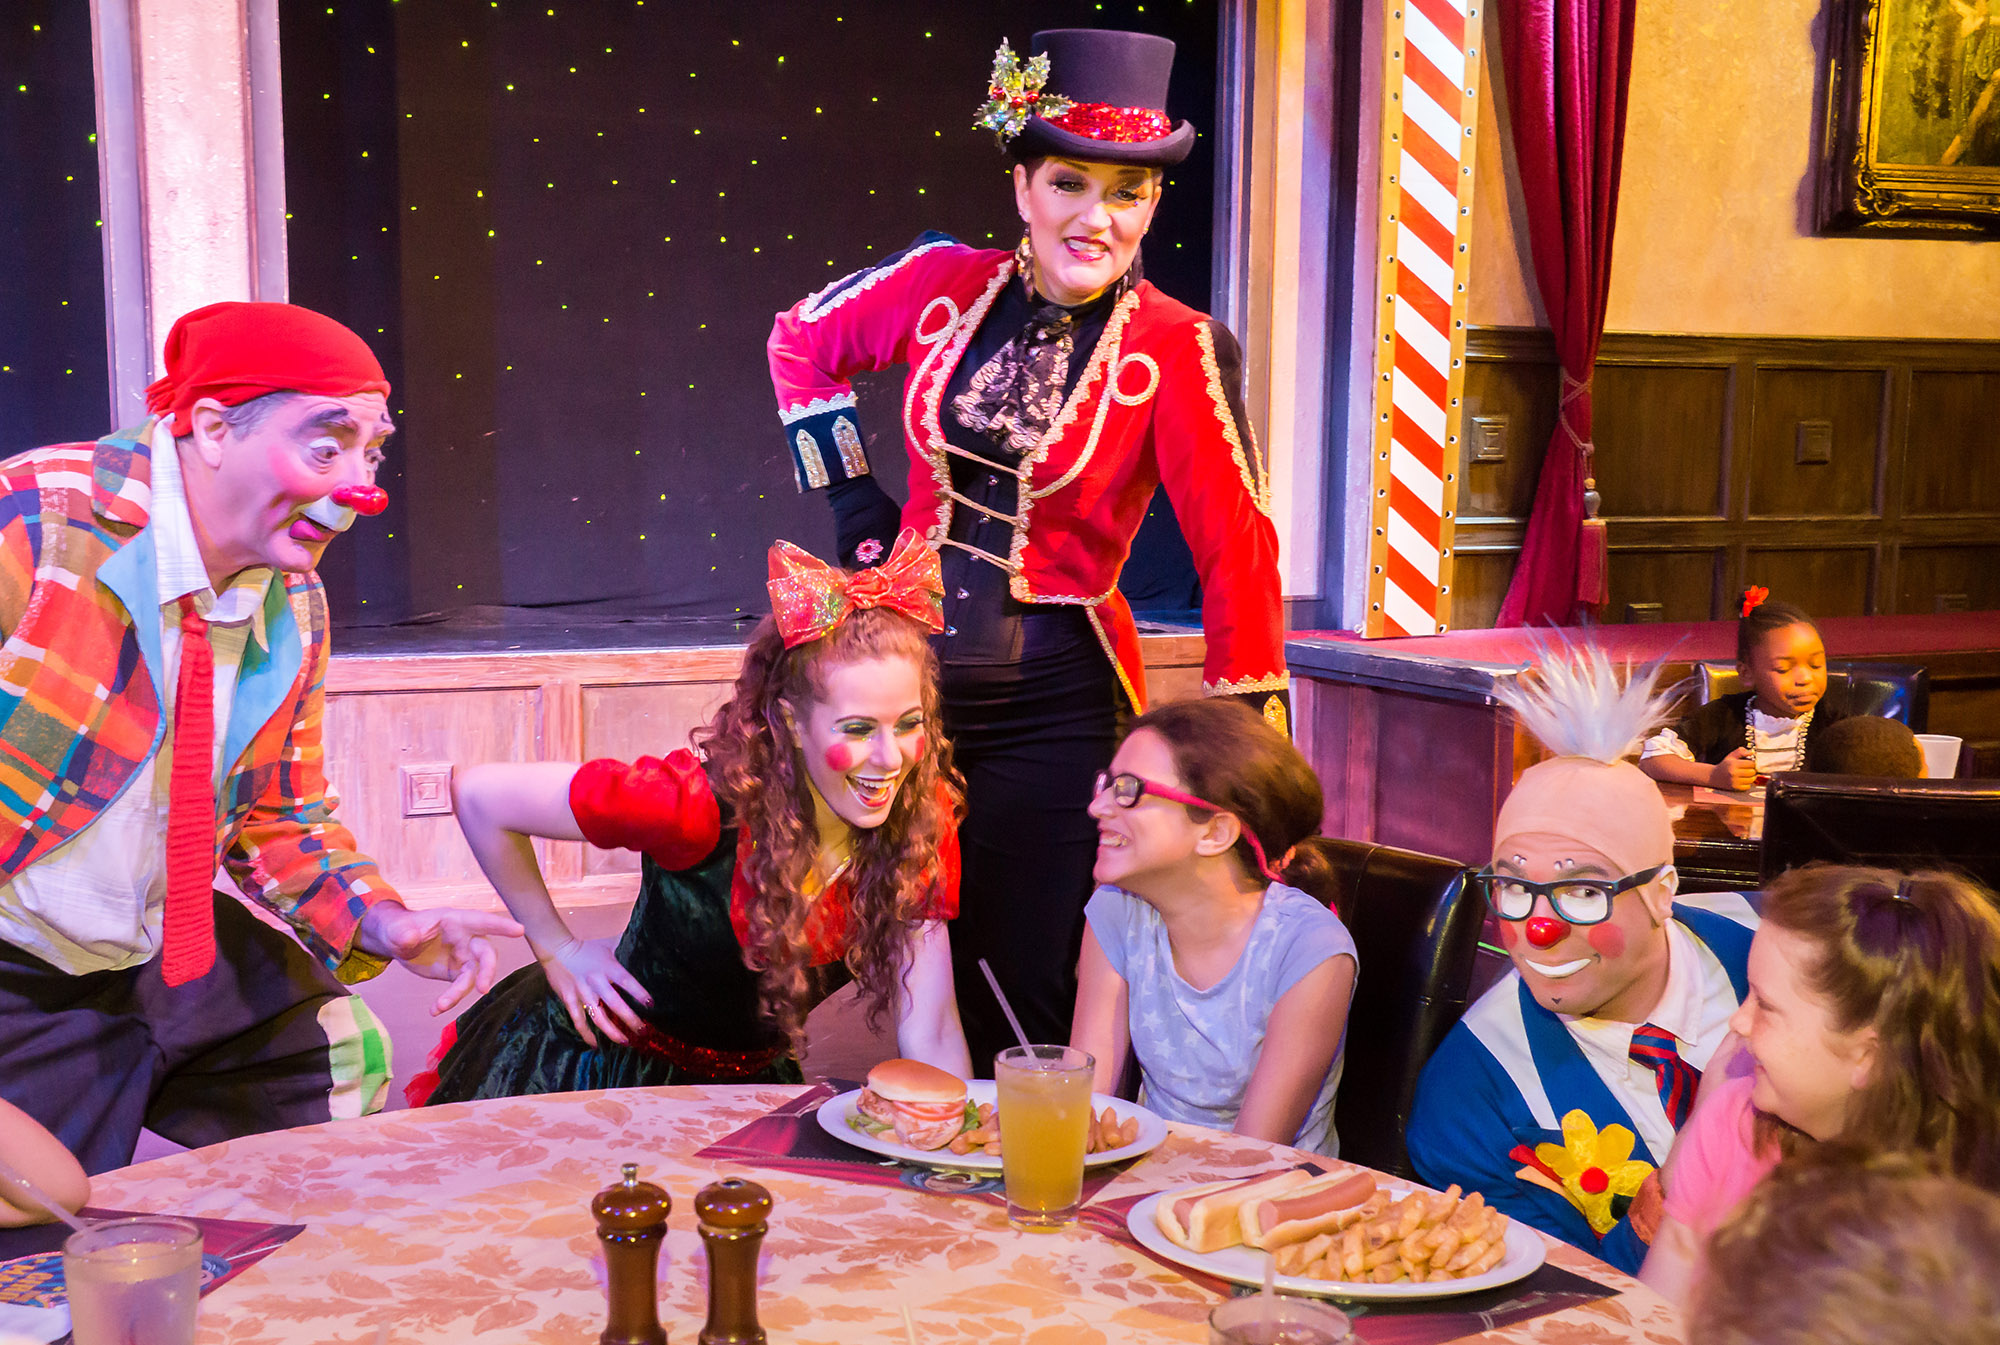 Orlando’s only circus themed dinner show that’s fun for all ages